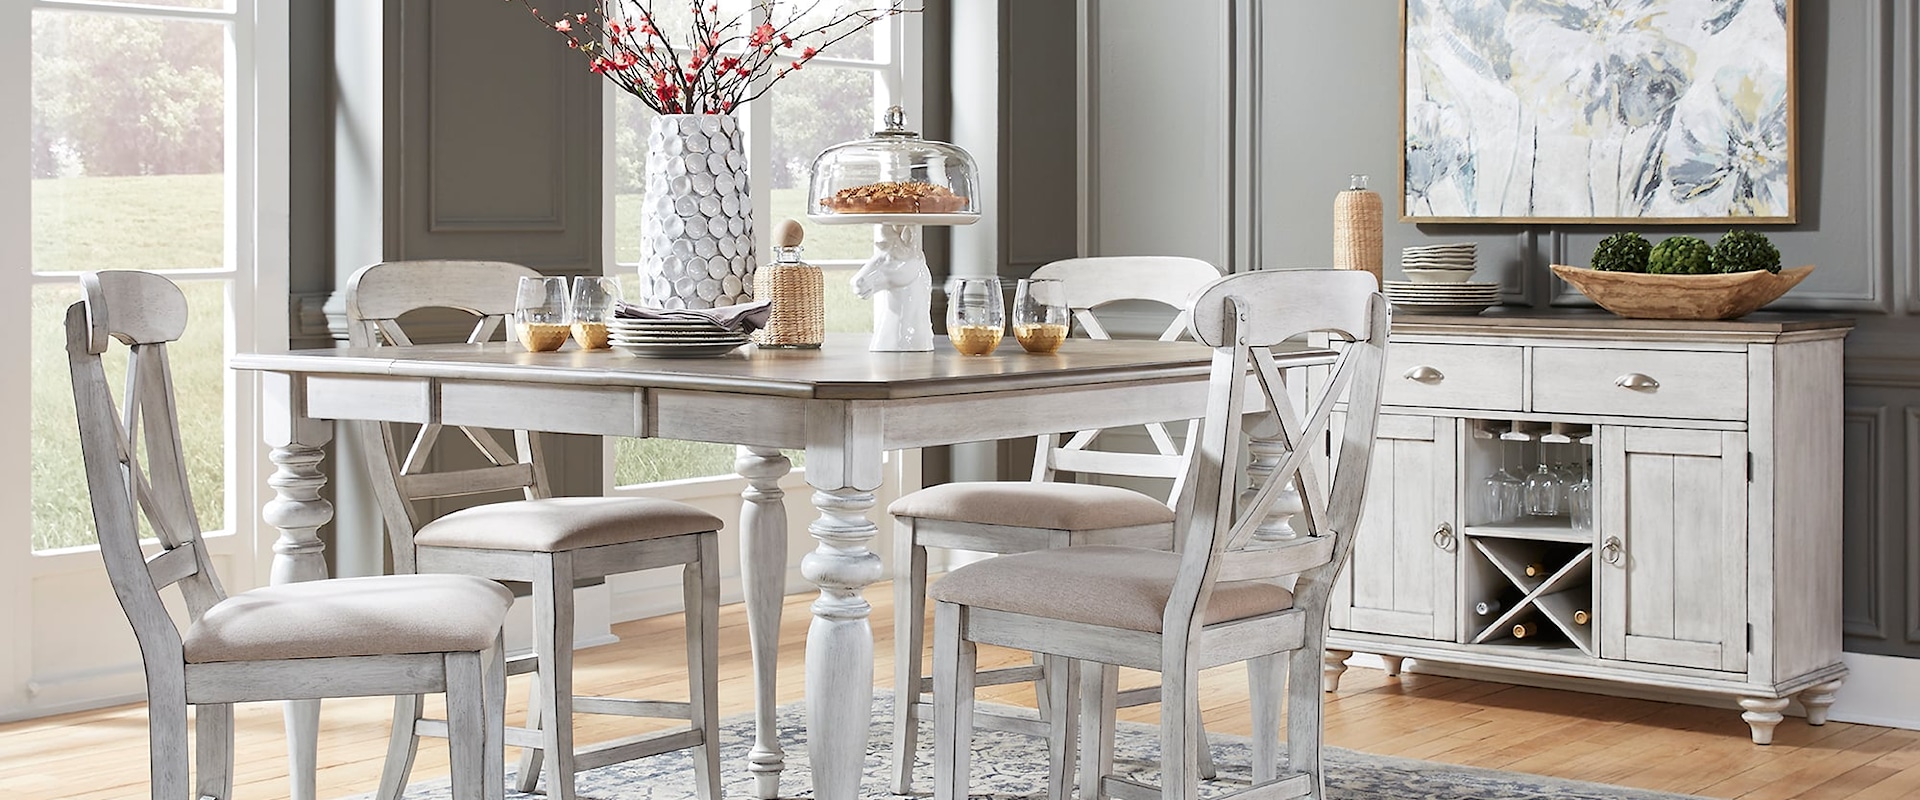 Modern 5-Piece Farmhouse Dining Set with Leaf Insert5-Piece Gathering Table Set